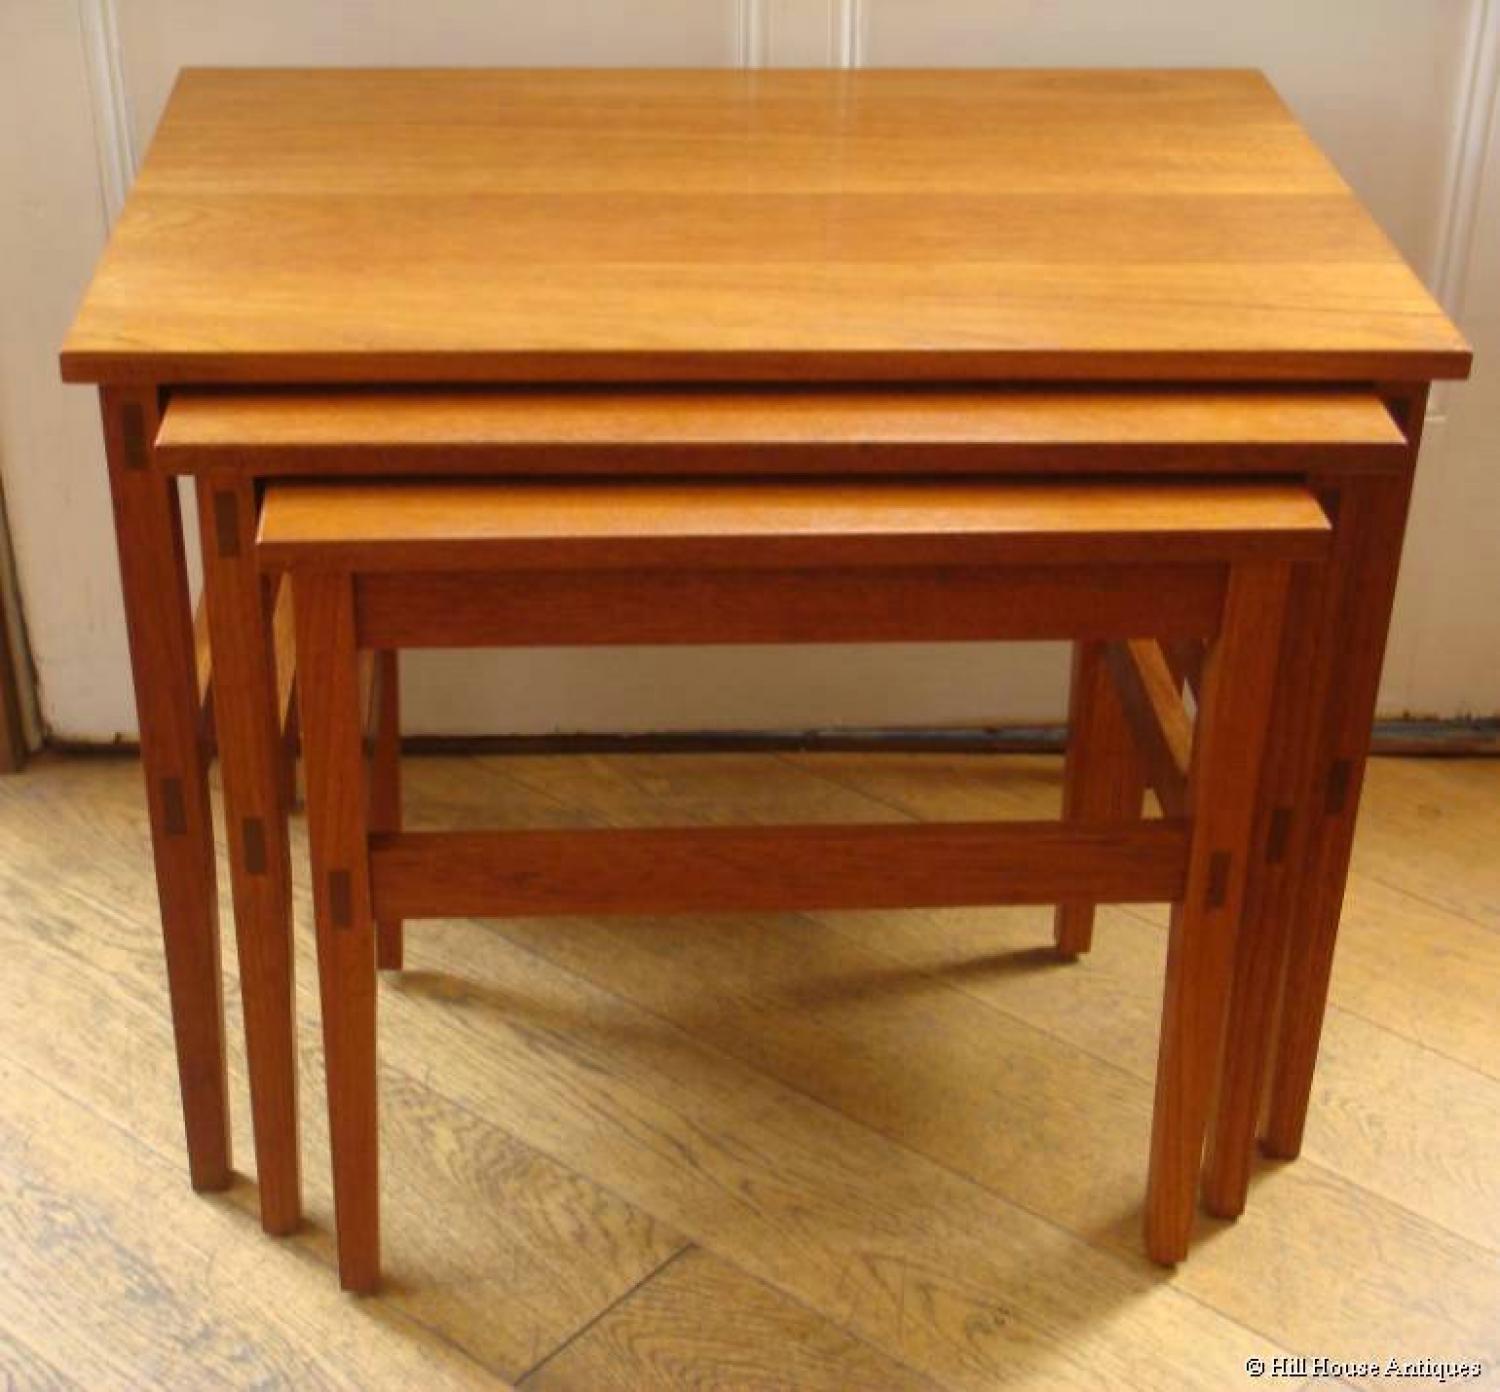 Cotswold School mid-century nest of tables